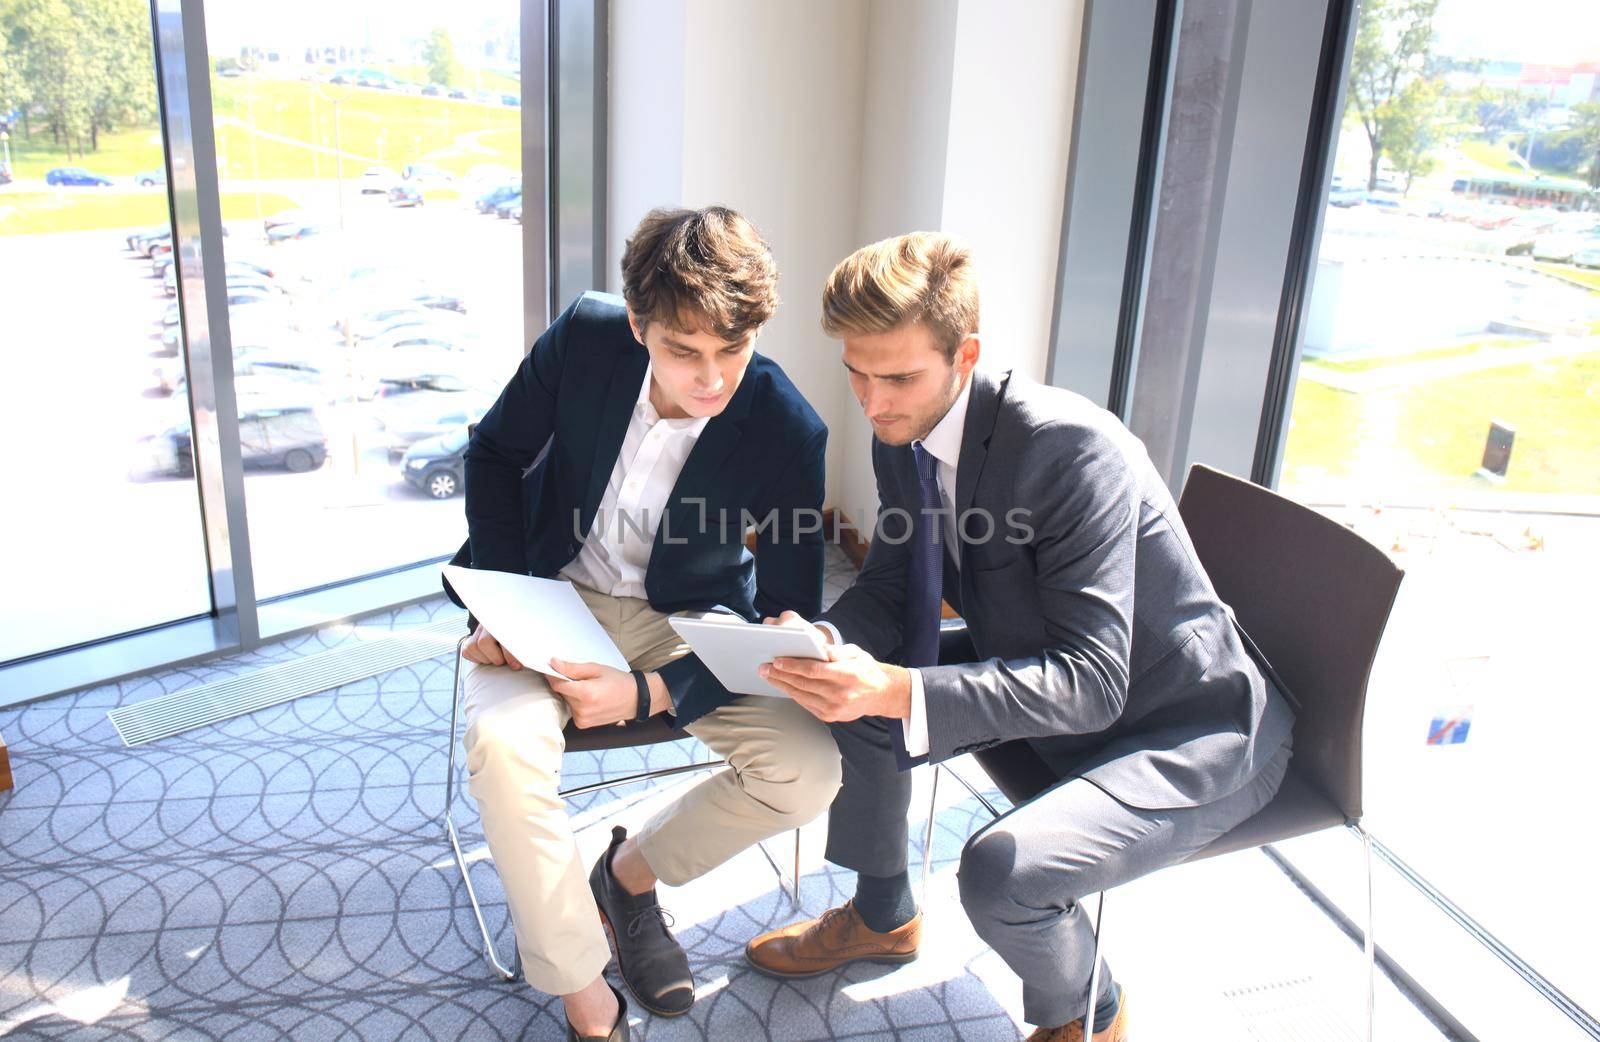 Mature businessman using a digital tablet to discuss information with a younger colleague in a modern business office.